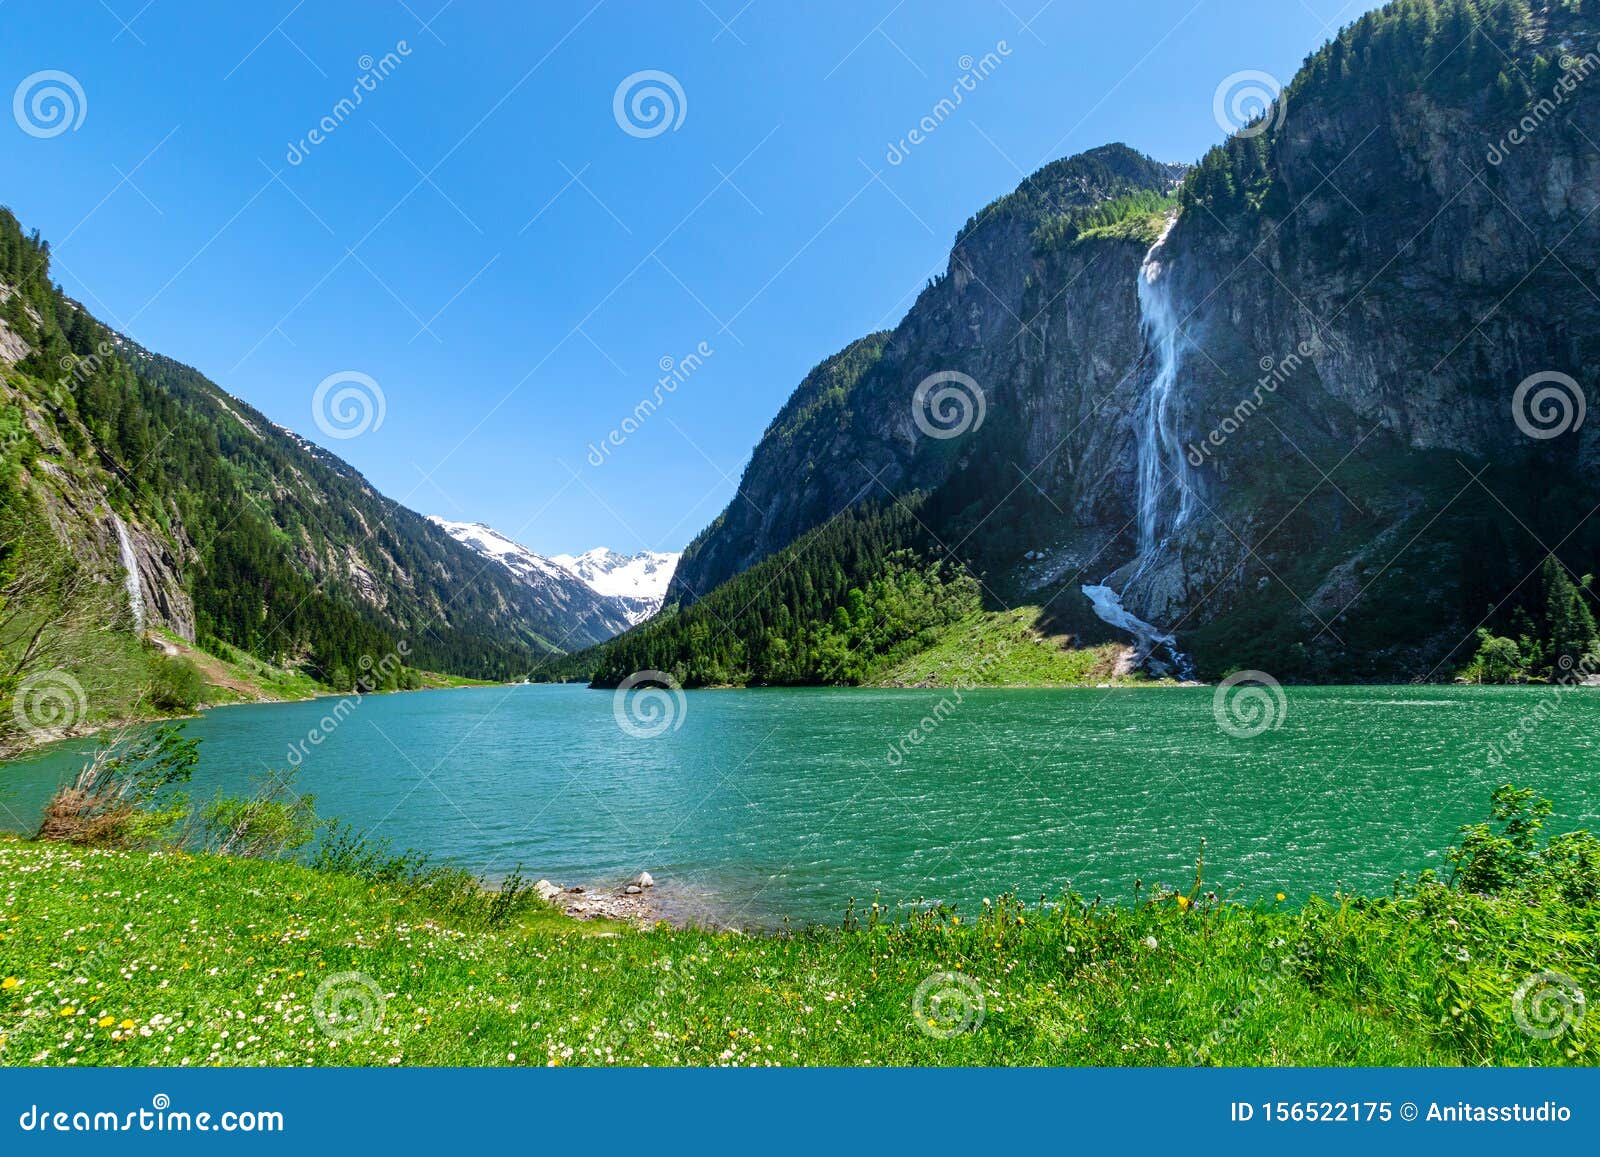 vagabond pastel hval Mountain Landscape with Clear Turquoise Lake and Waterfall in the Alps.  Zillertal Alps Nature Park, Austria Stock Image - Image of melt,  environment: 156522175